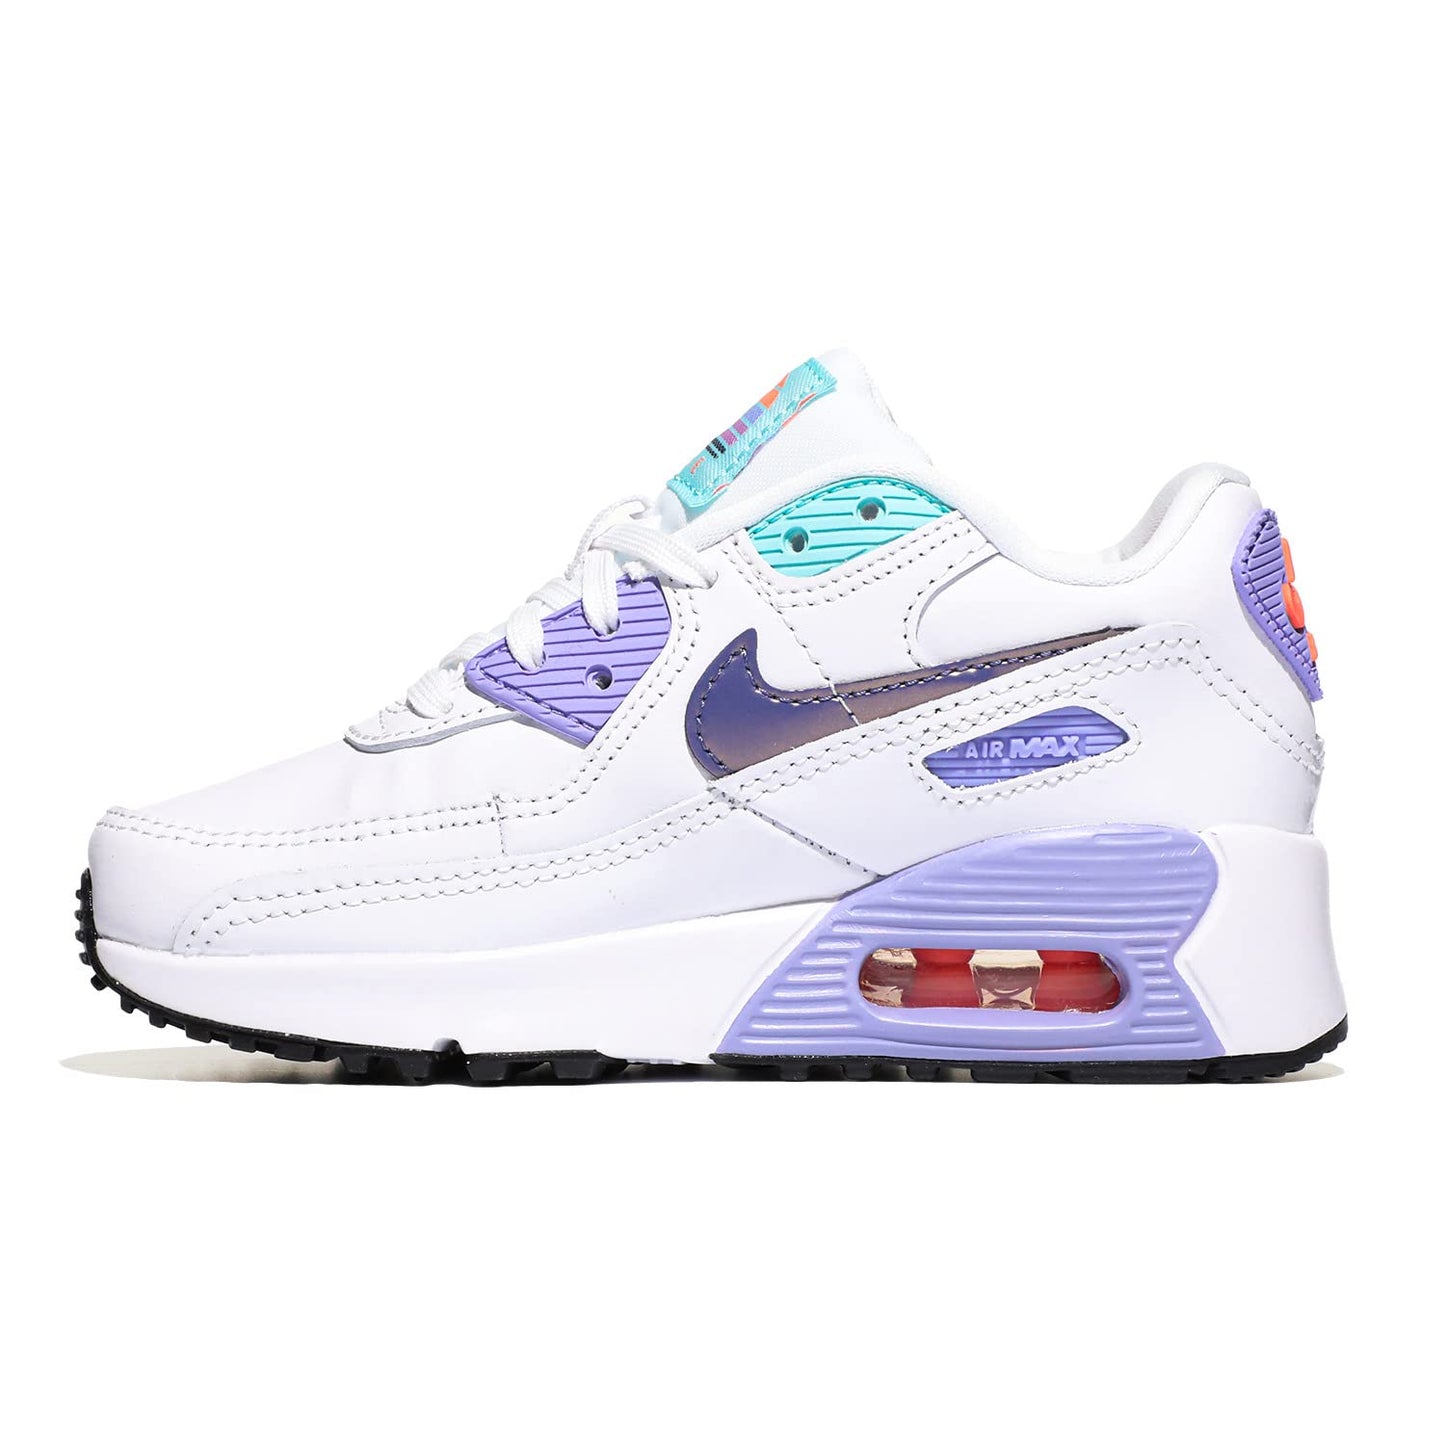 Image 3 of Air Max 90 LTR SE 2 (Little Kid)